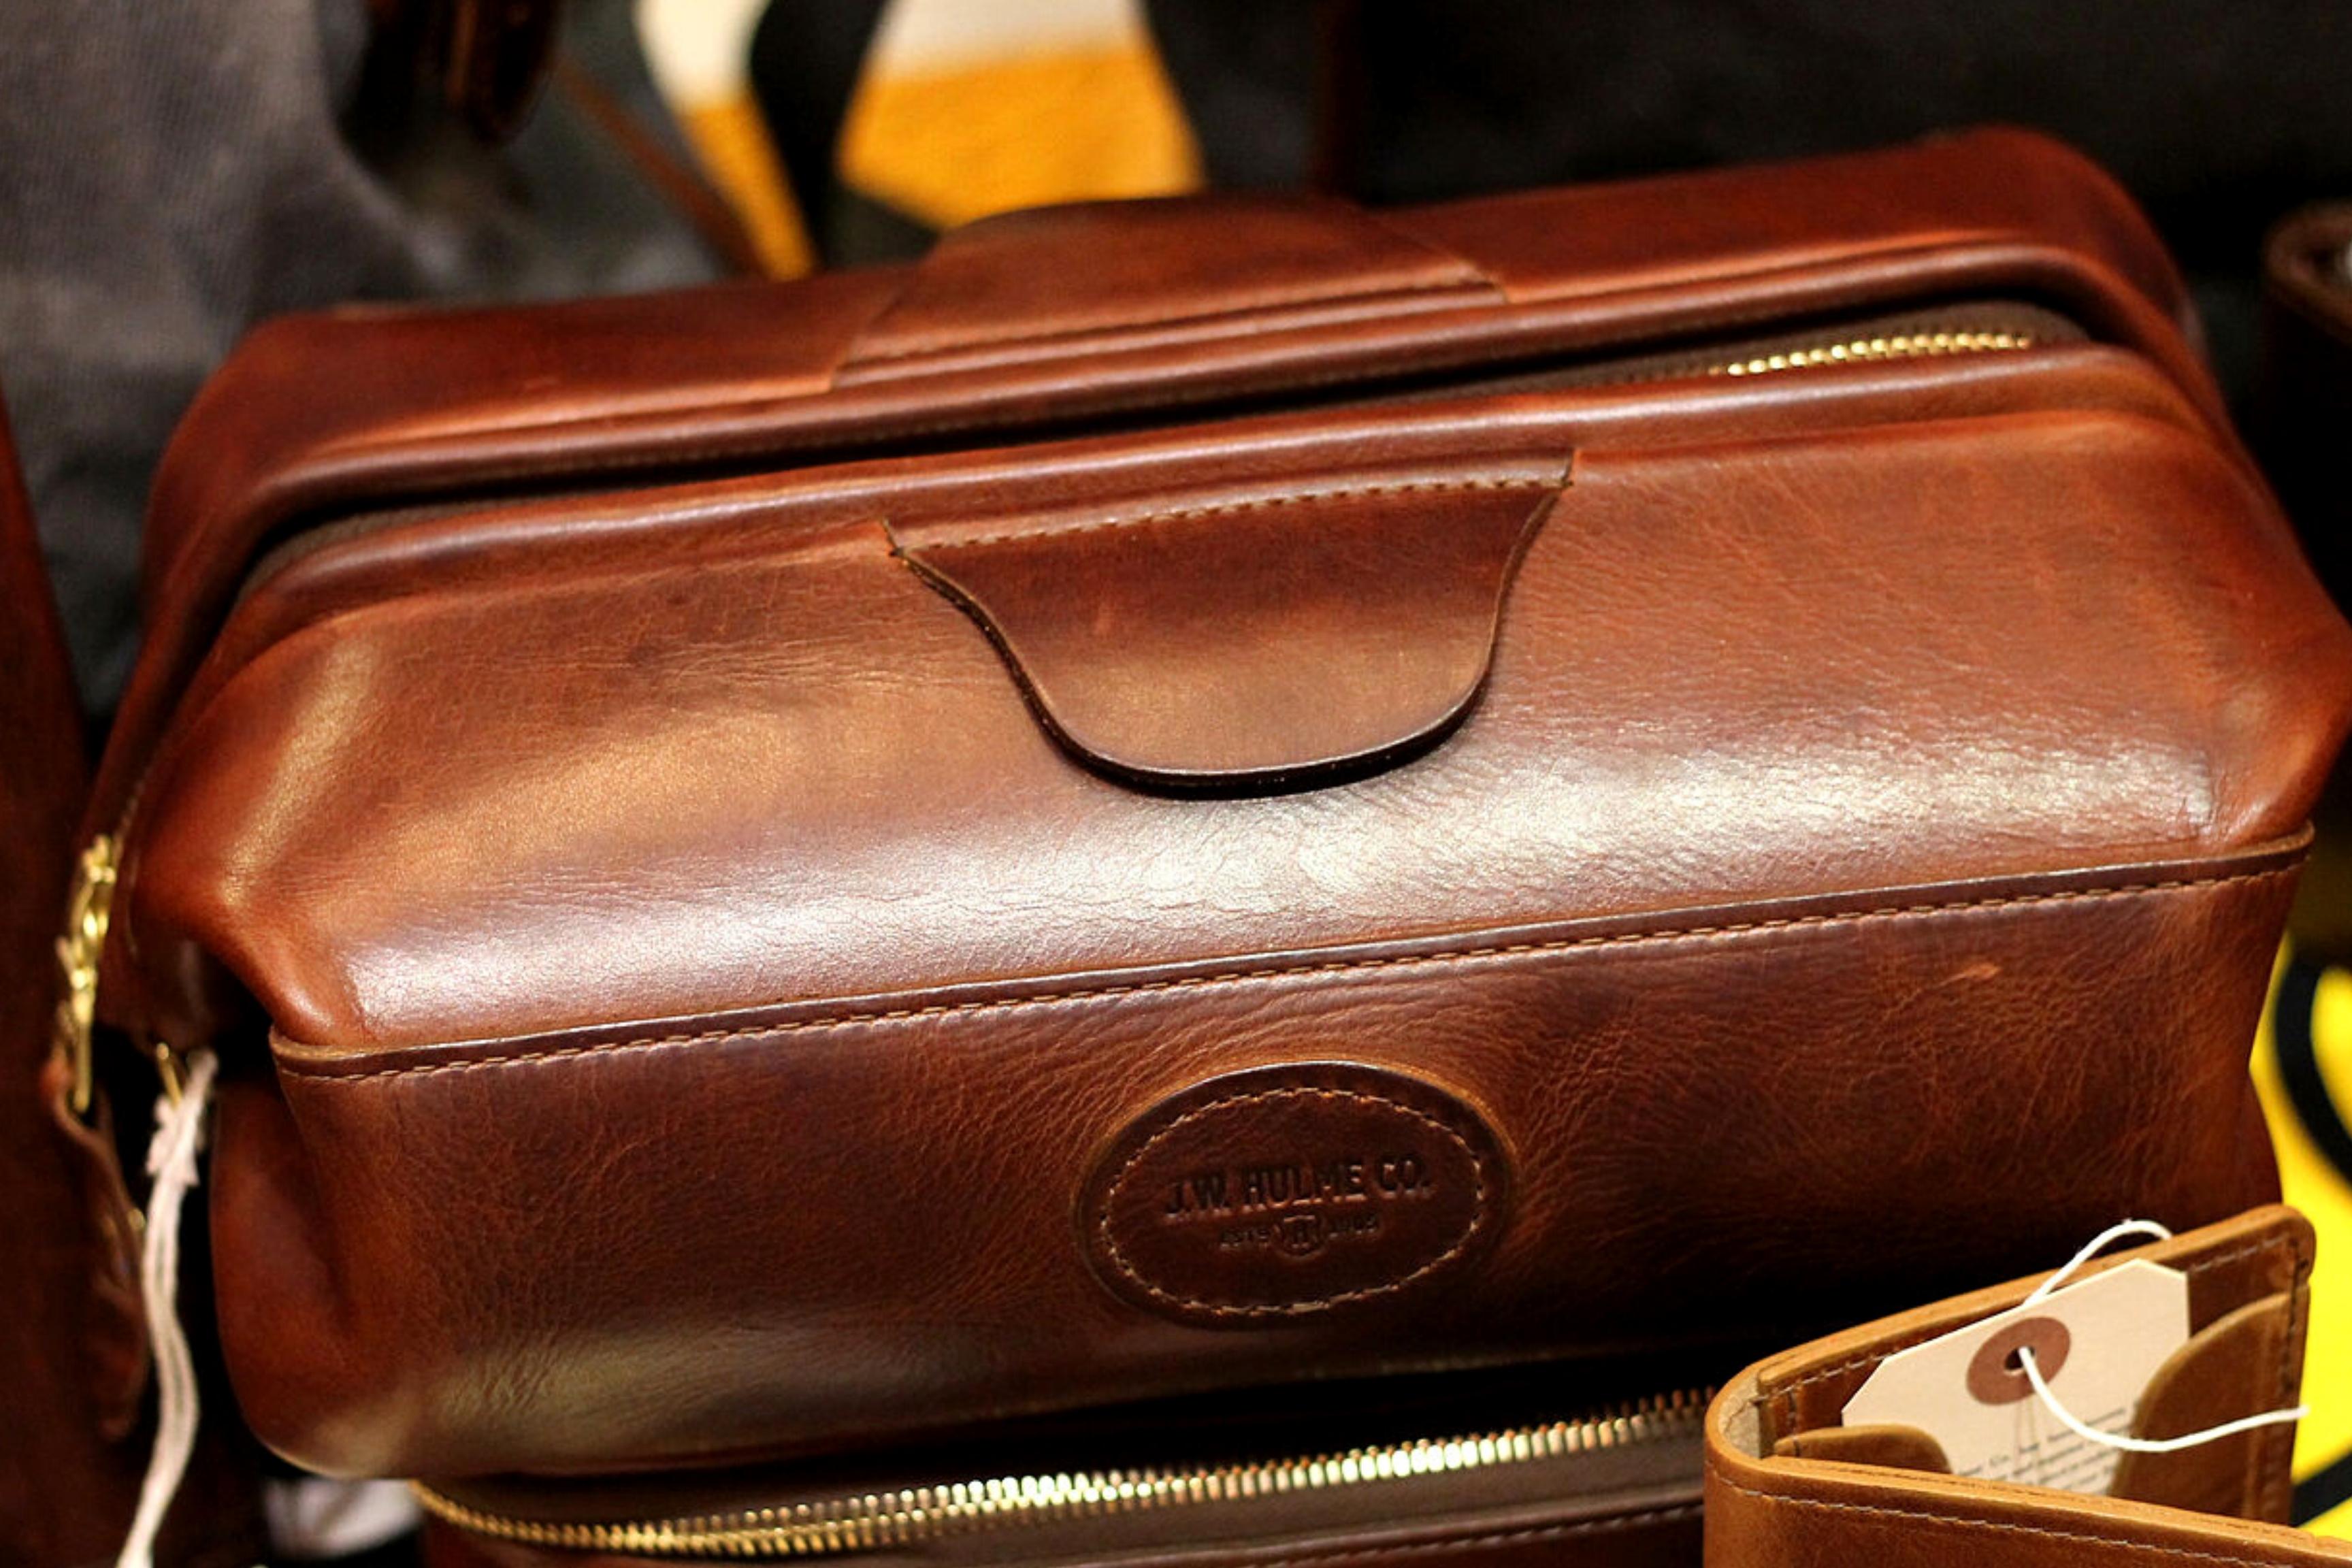 What Is a Dopp Kit and How Is it Different From a Toiletry Bag?